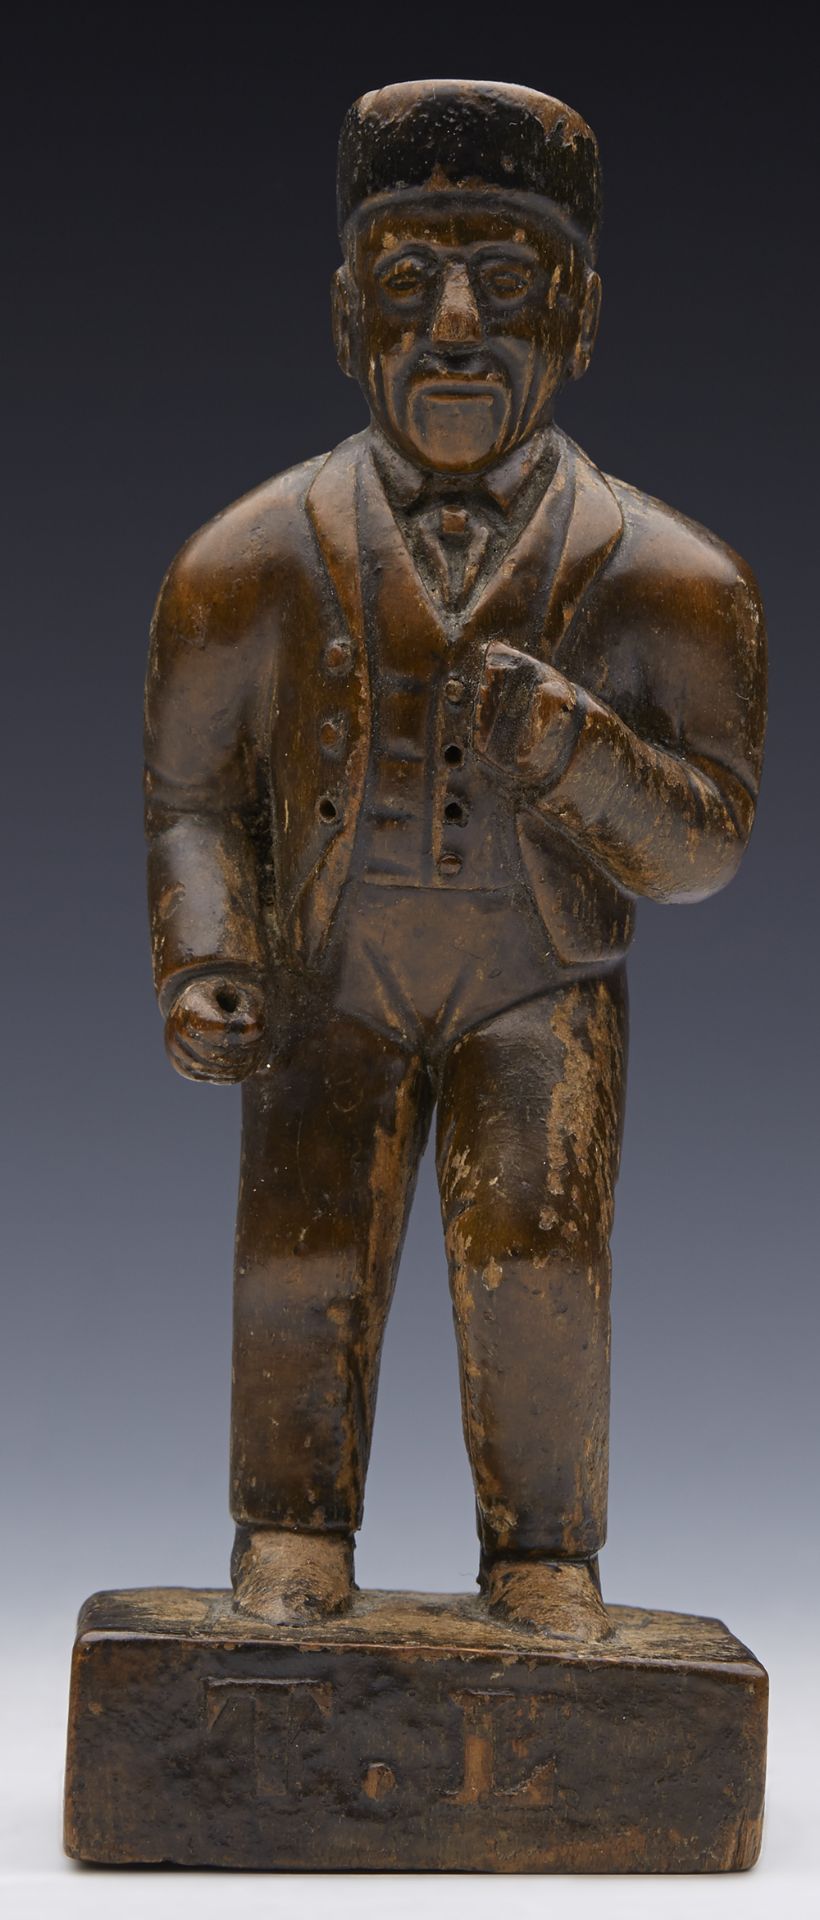 ANTIQUE CARVED BLACKFOREST SUITED FIGURE OF A LOCAL MAN 19TH C.   DIMENSIONS   Height 15cm, Width